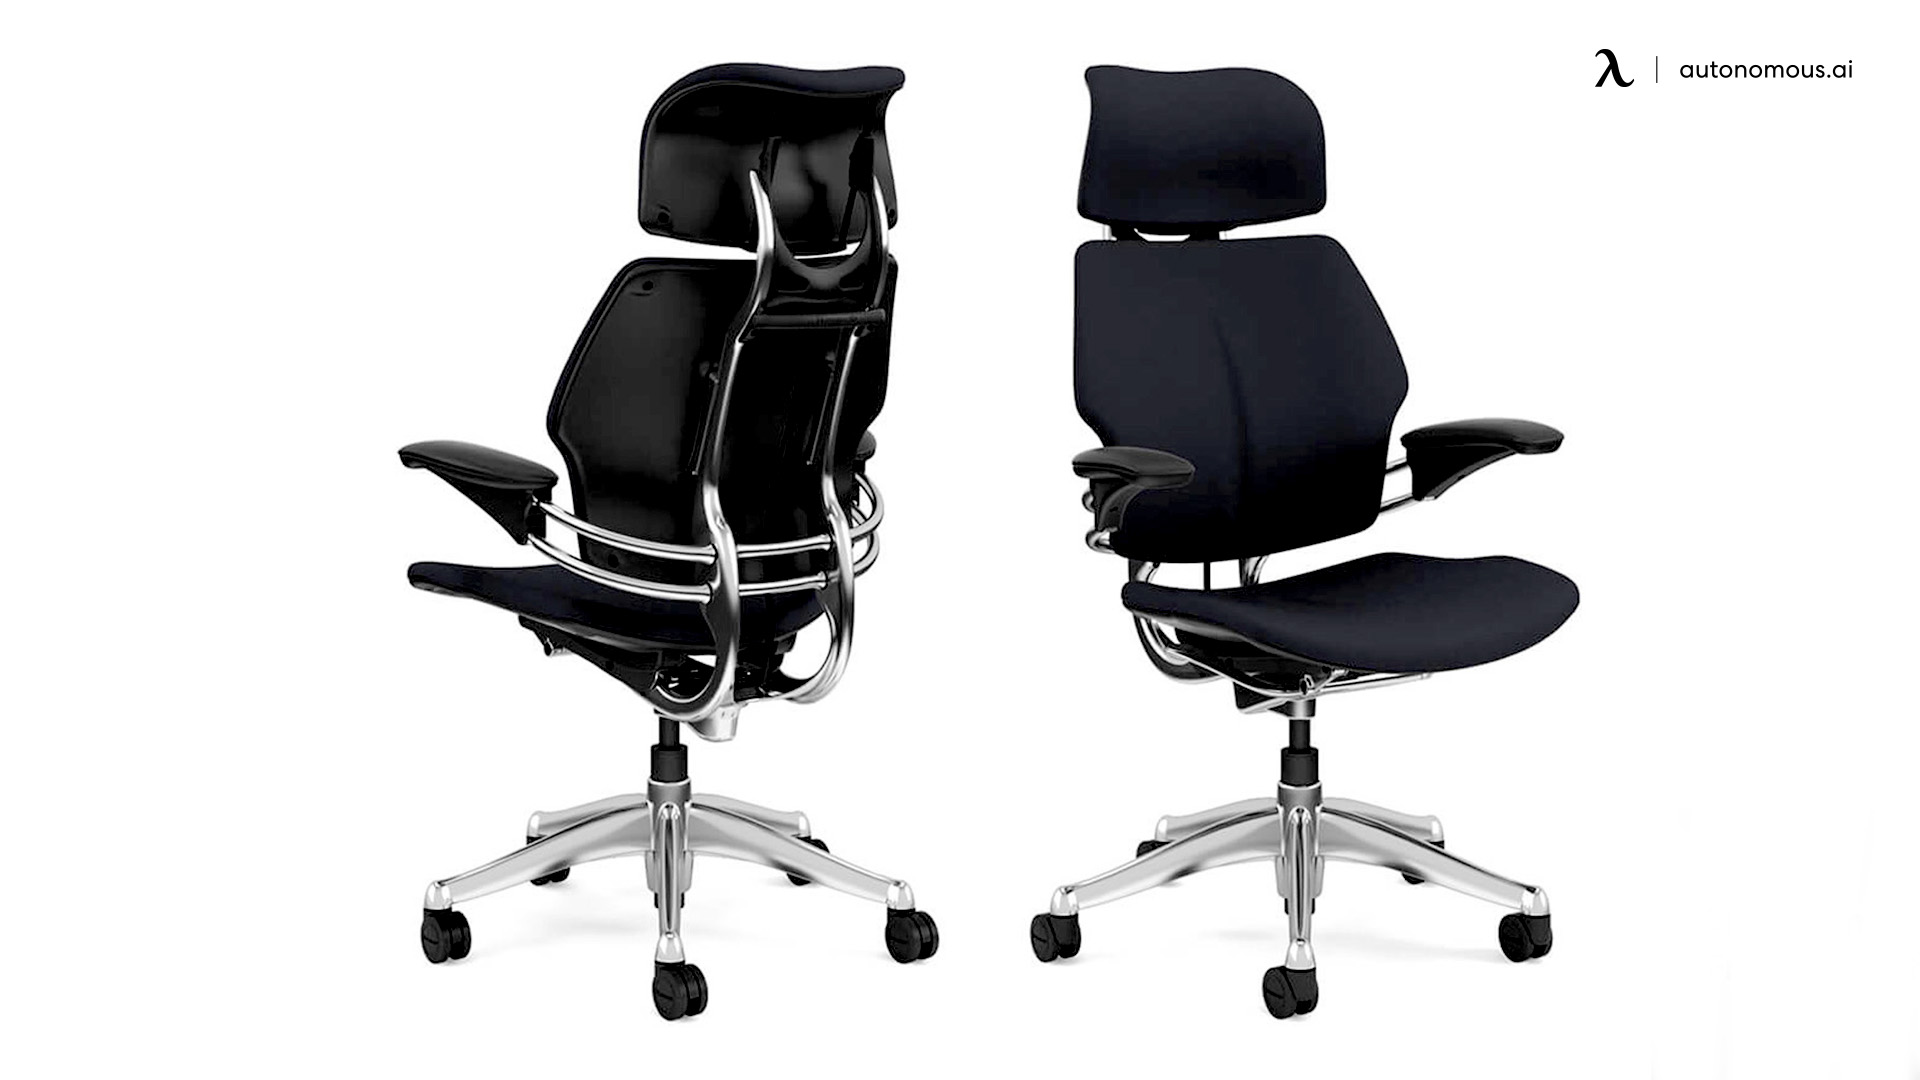 Humanscale Freedom Desk Chair